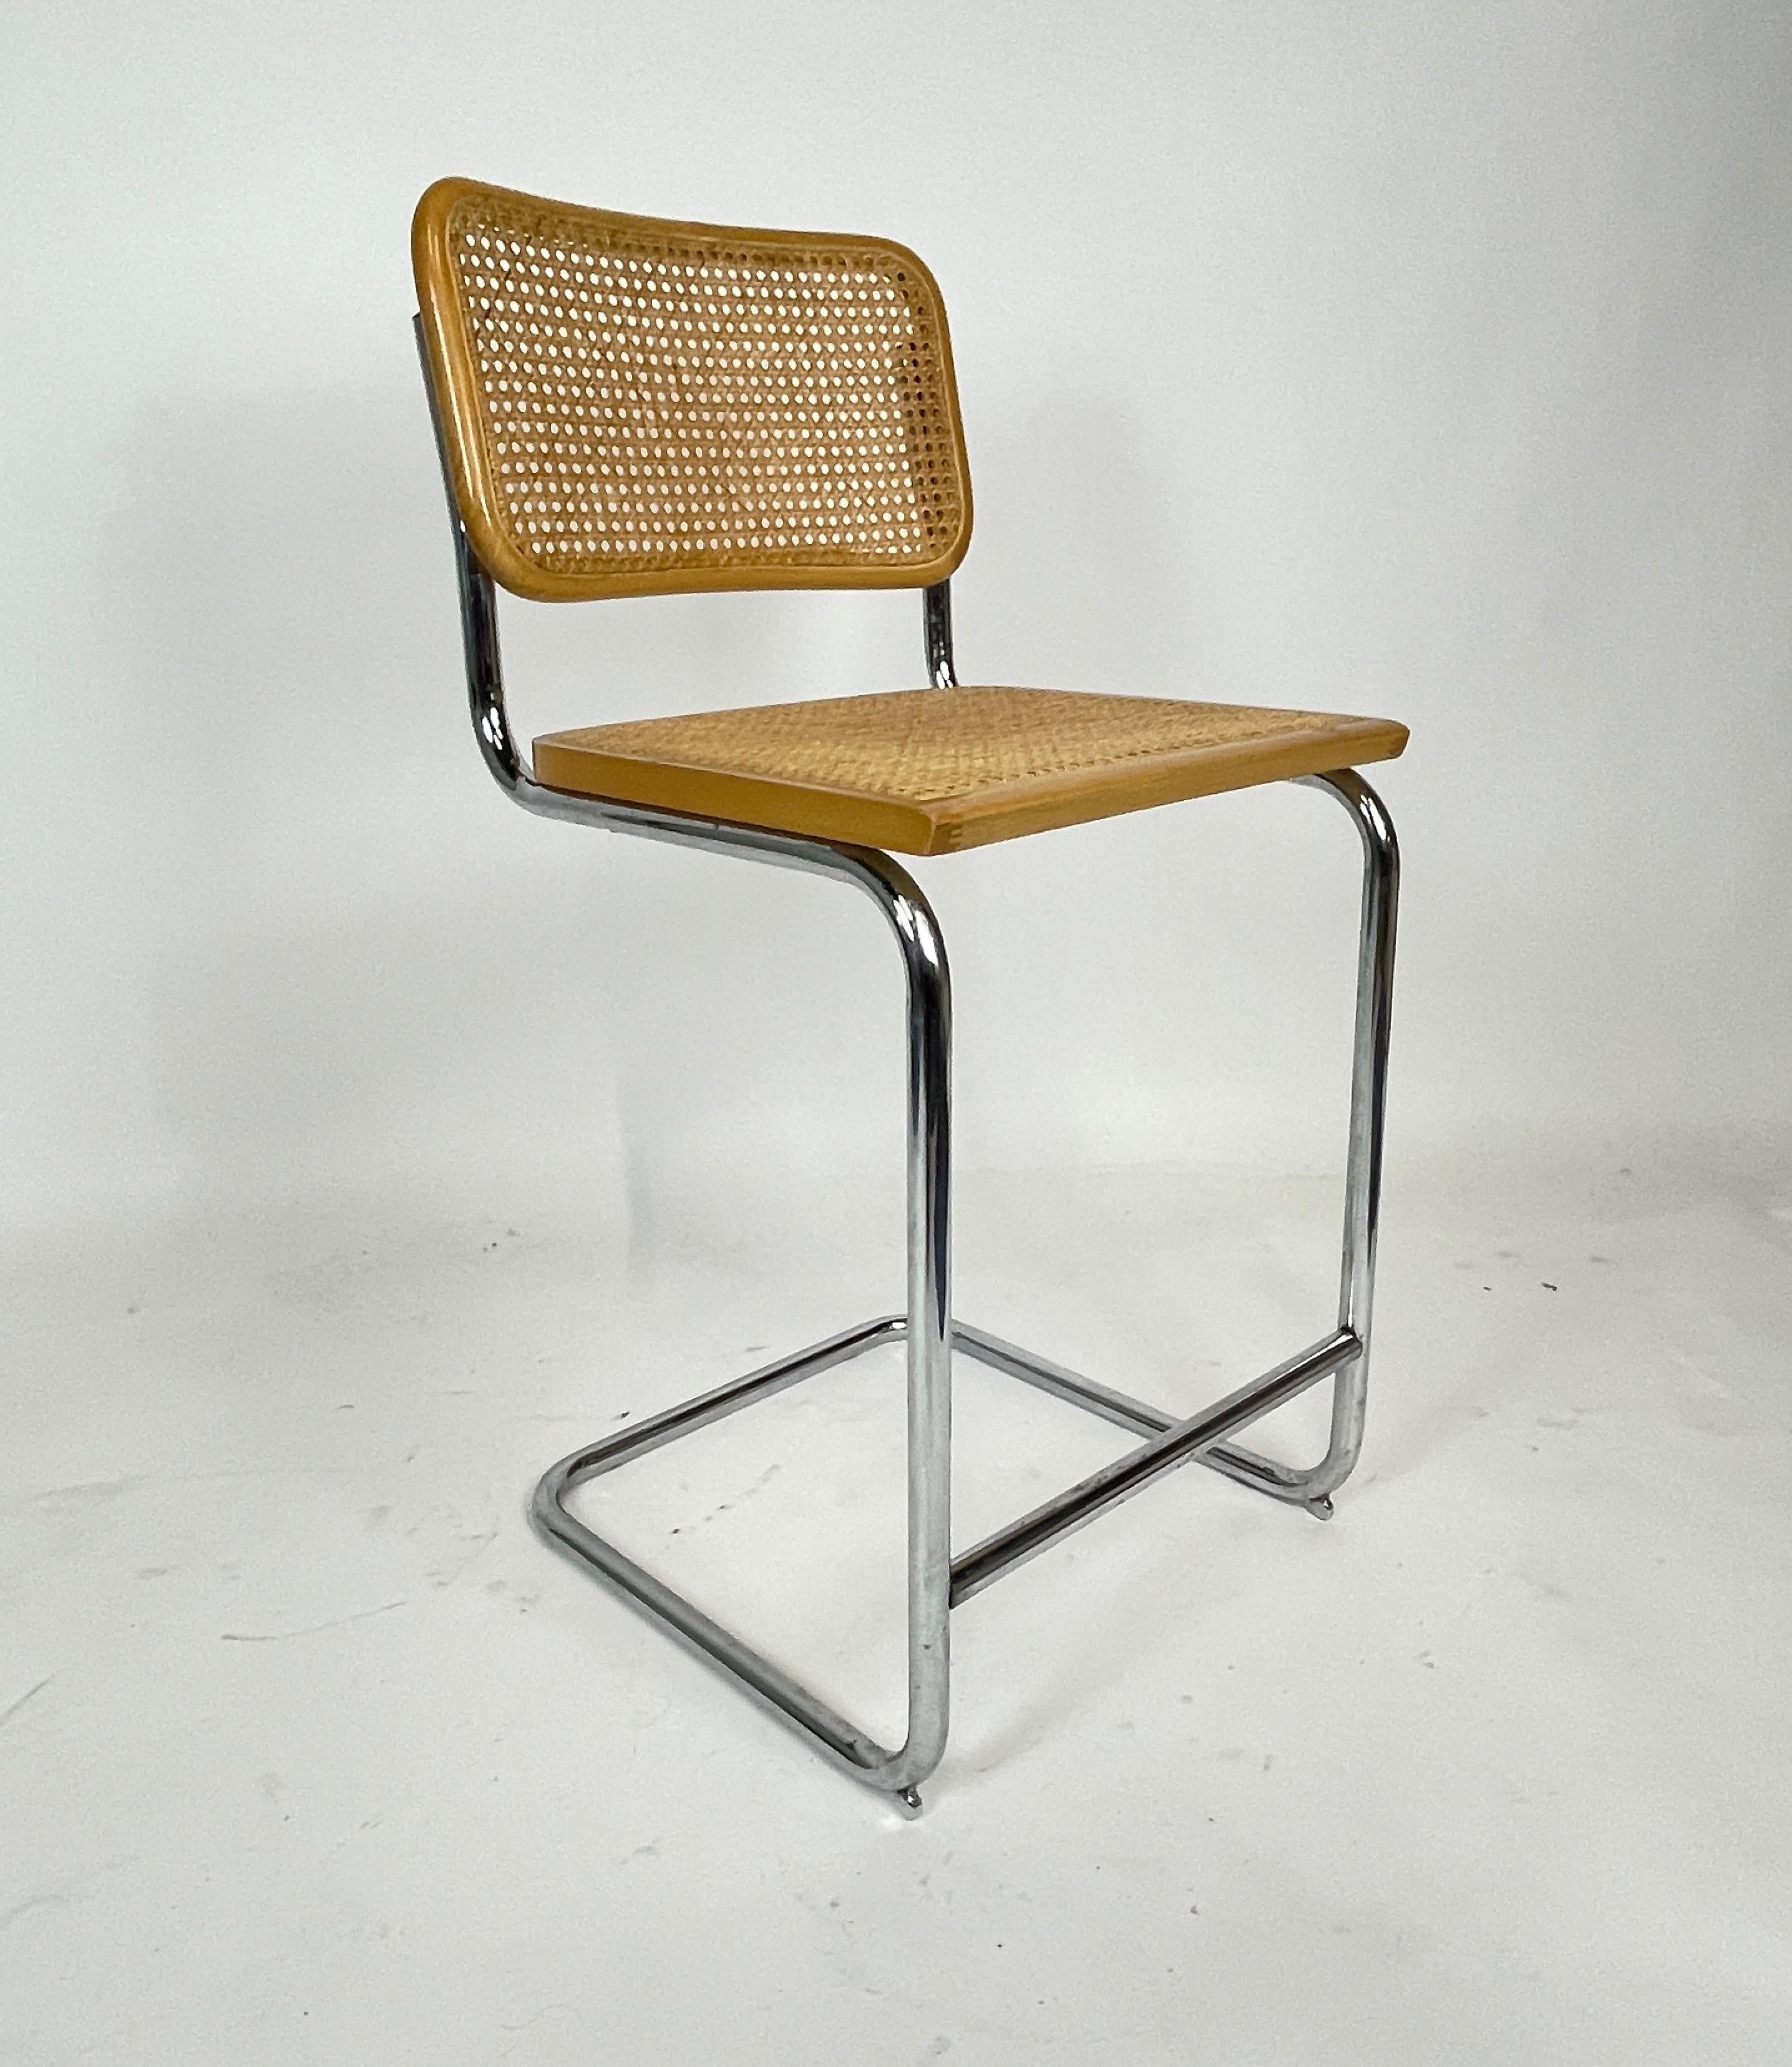 Bauhaus Pair of Marcel Breuer Cane, Birch, and Chrome Cesca Stools Made in Italy